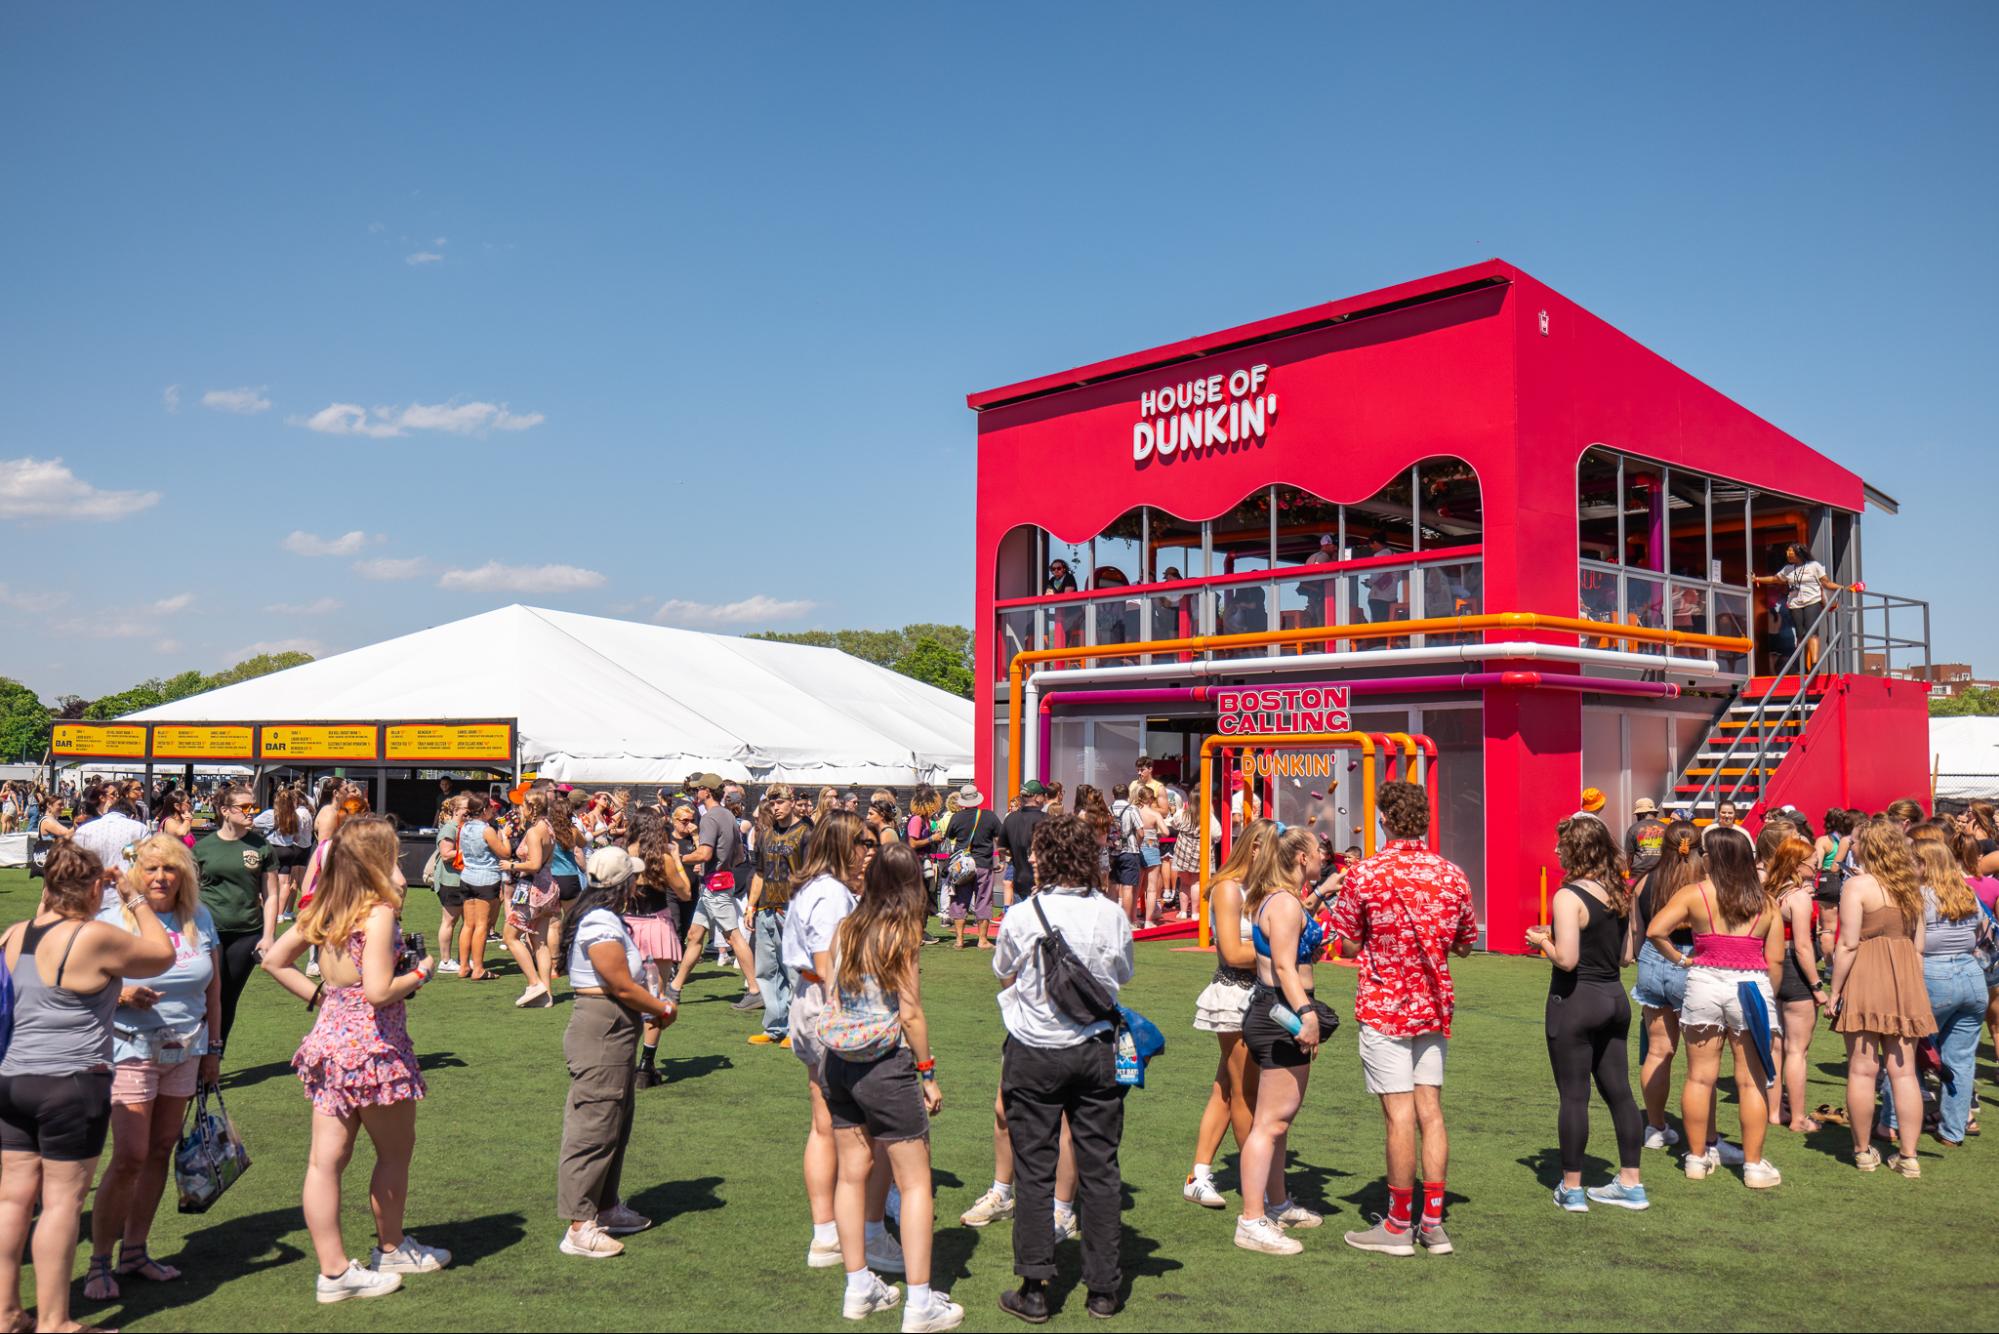 "Dunkin booth at Boston Calling"